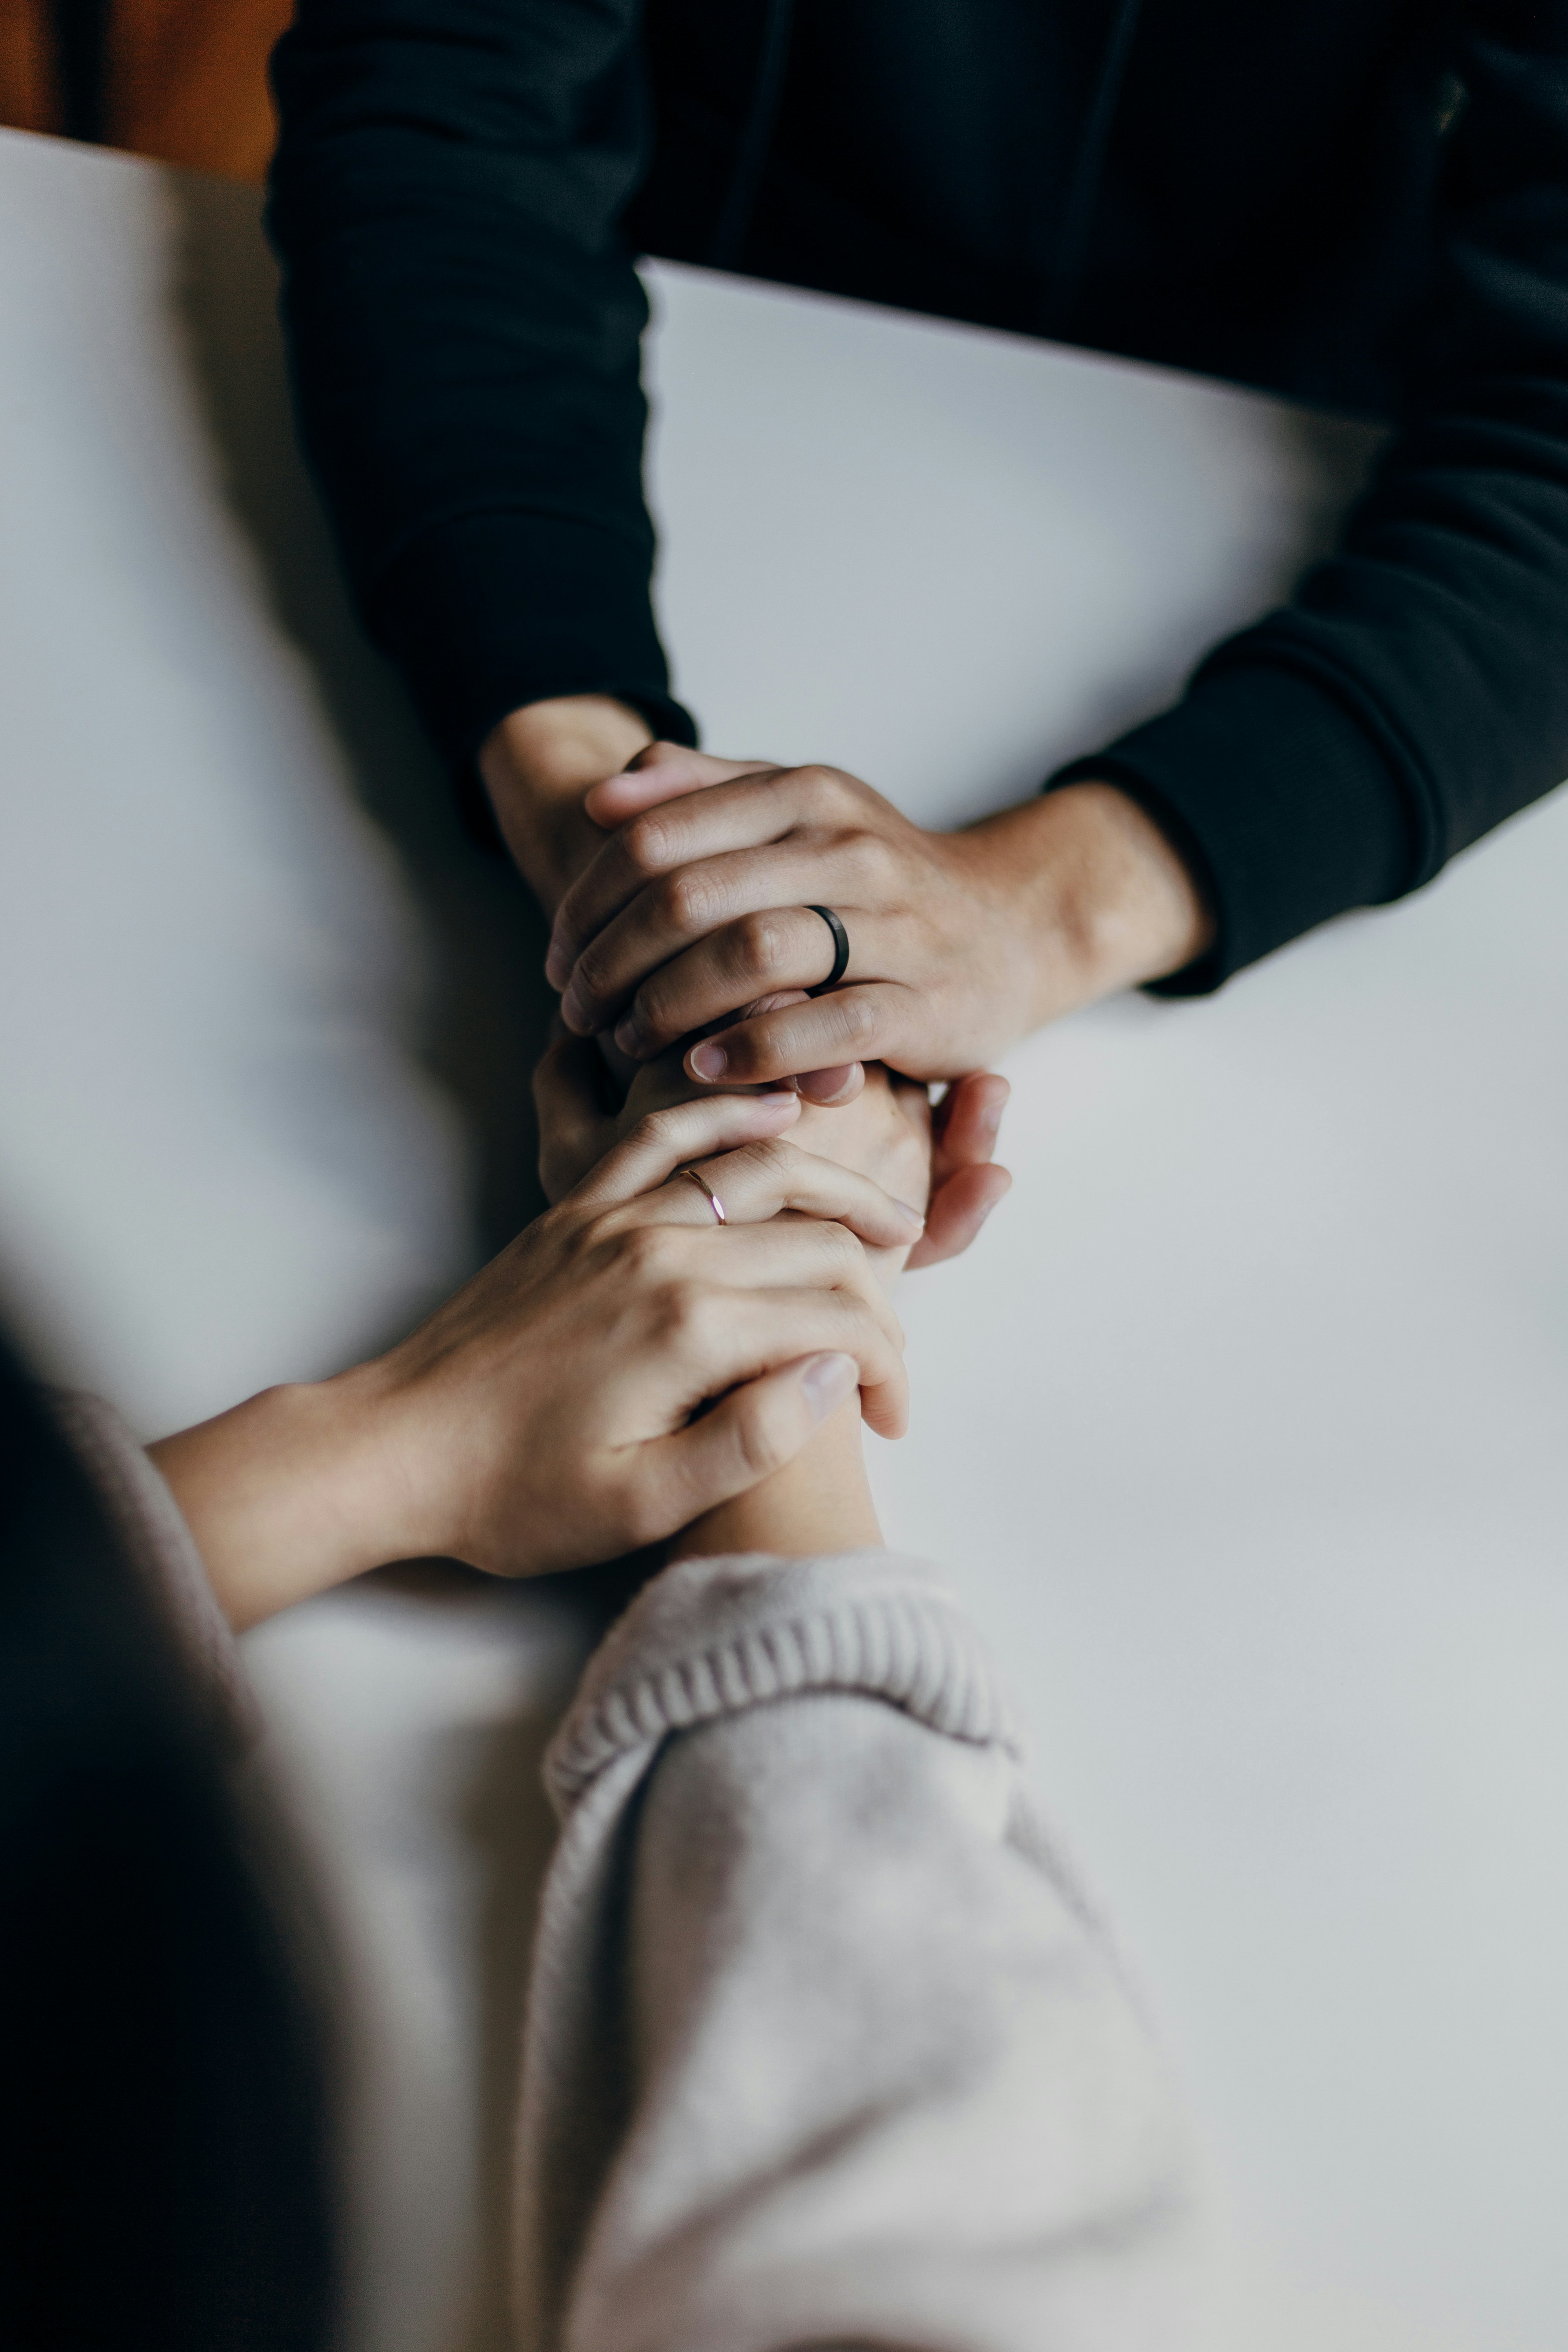 Two people holding each other's hands | Source: Unsplash